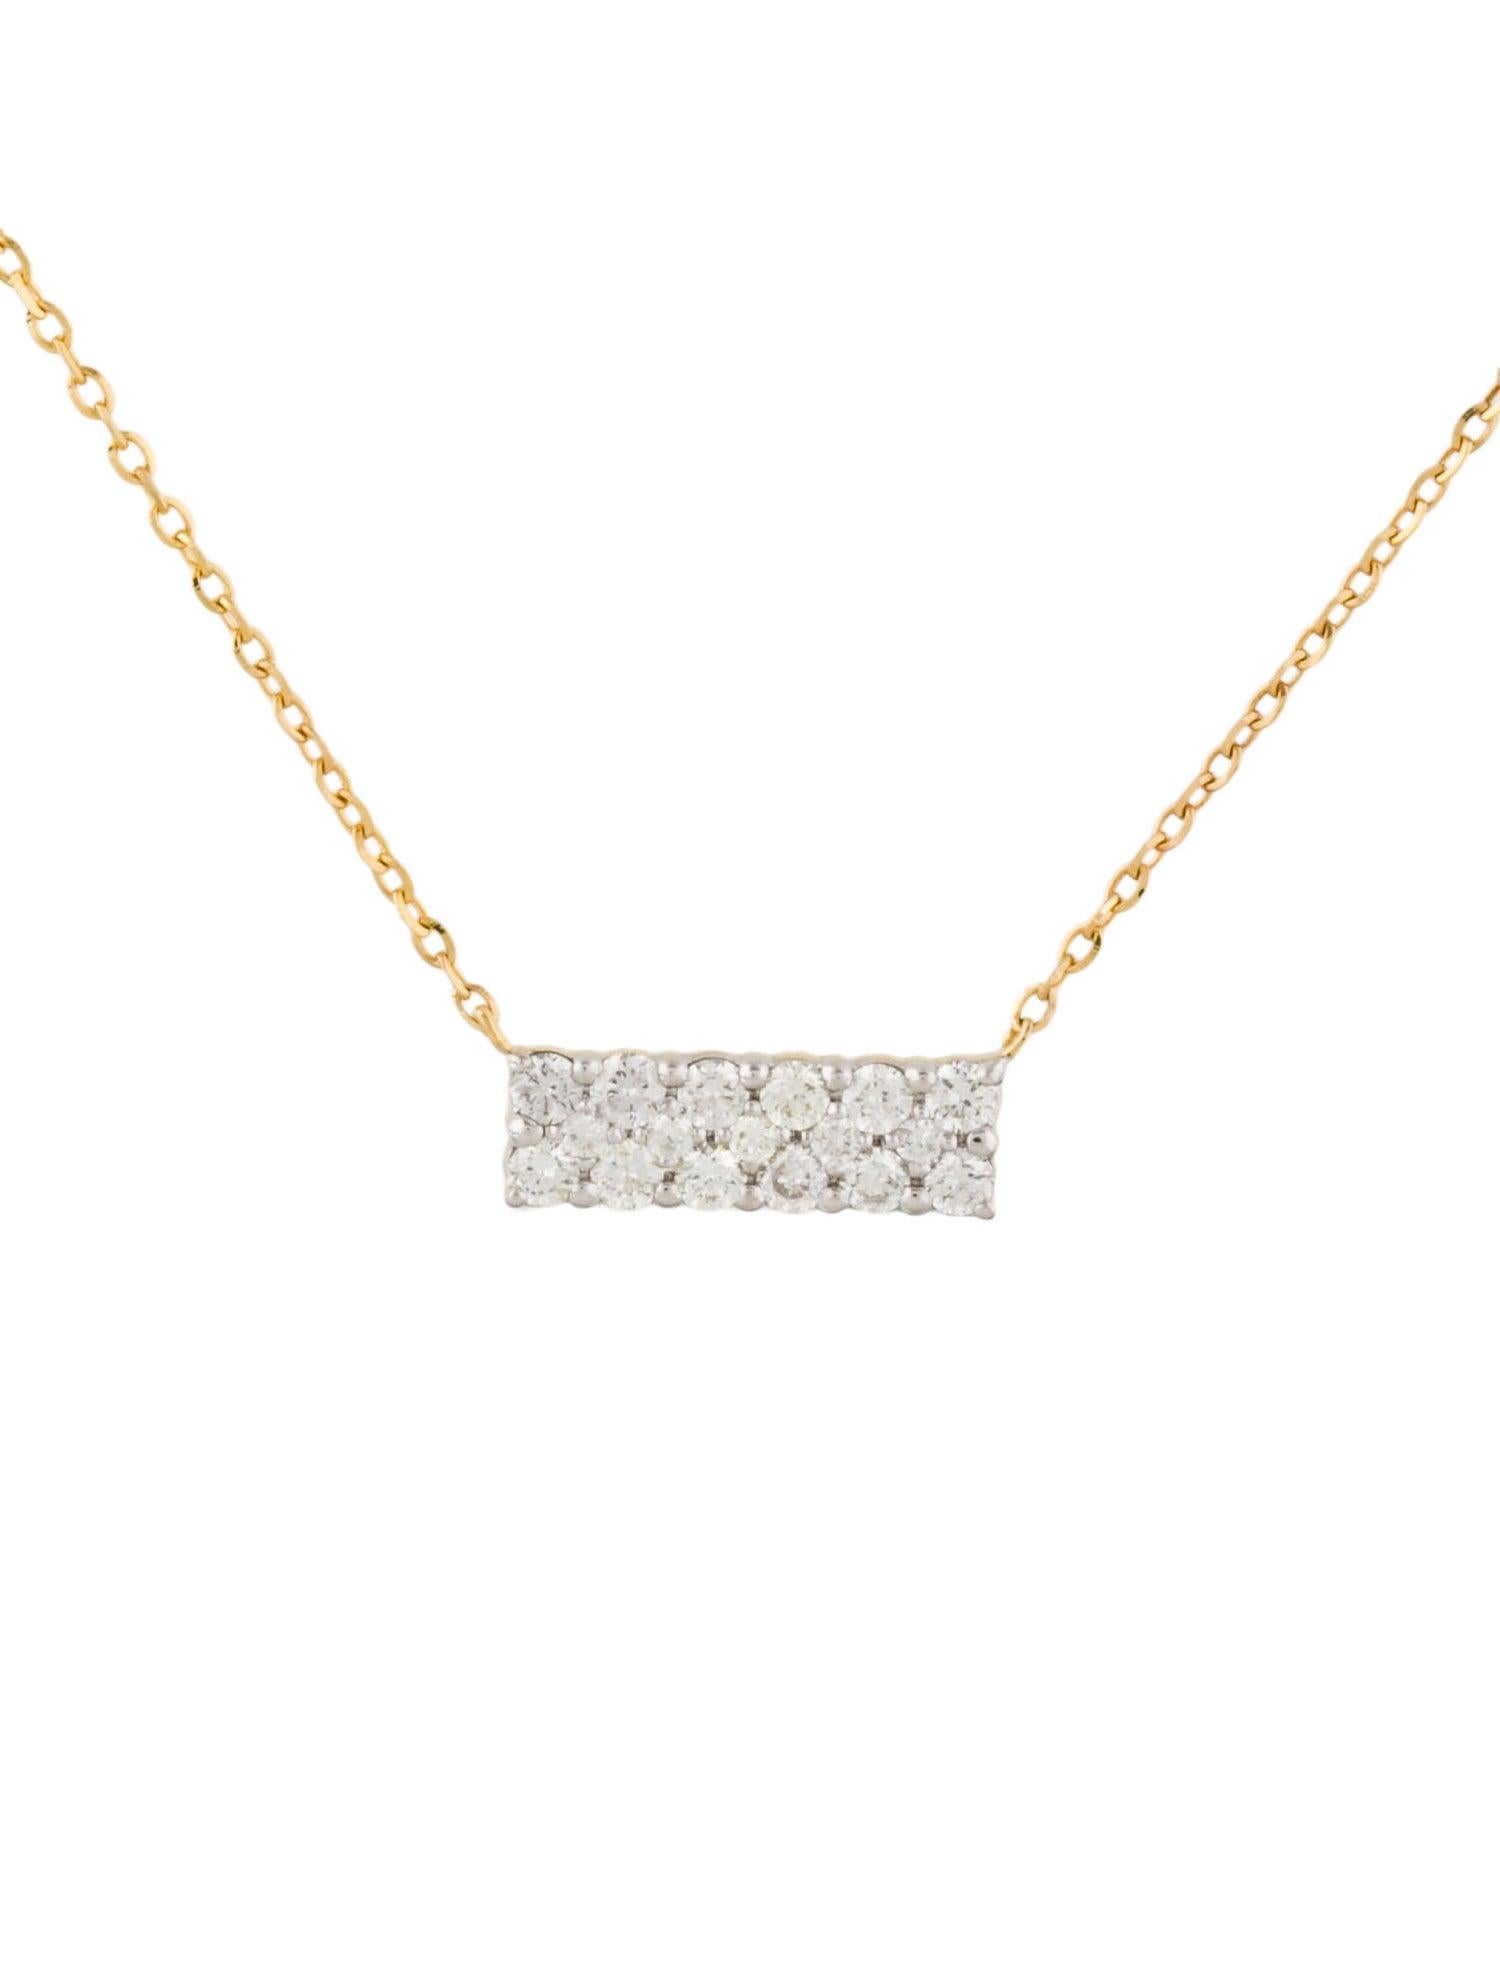 14K White Gold 0.23 Carat Diamond Necklace In New Condition For Sale In Great neck, NY